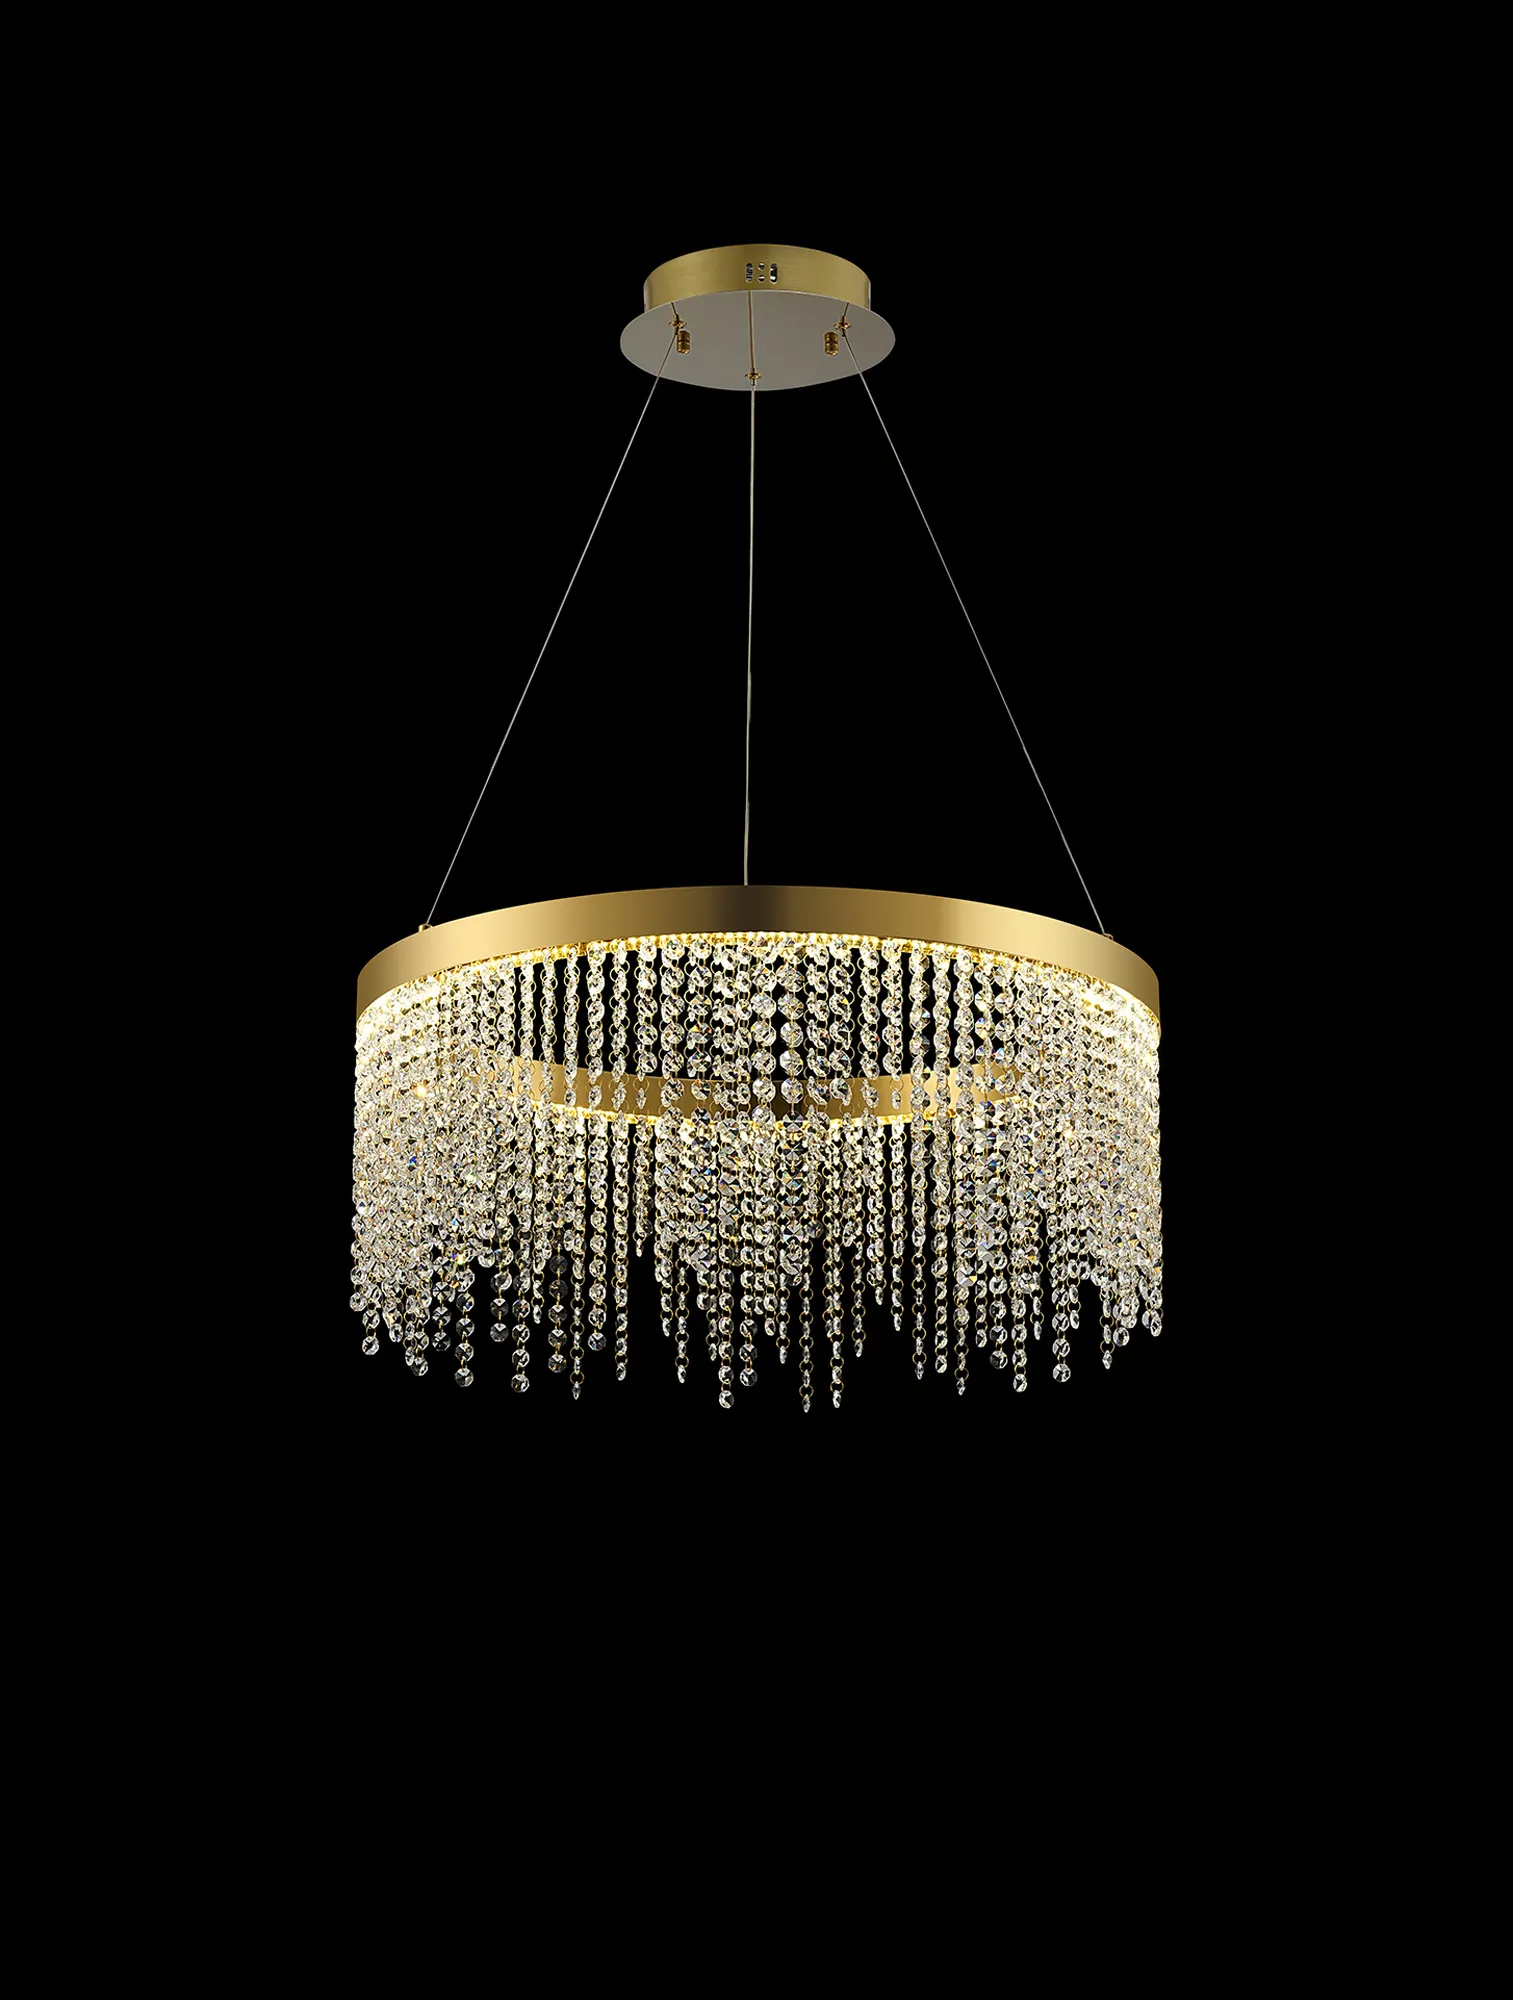 Bano French Gold Crystal Ceiling Lights Diyas Ringed & Square Crystal Fittings